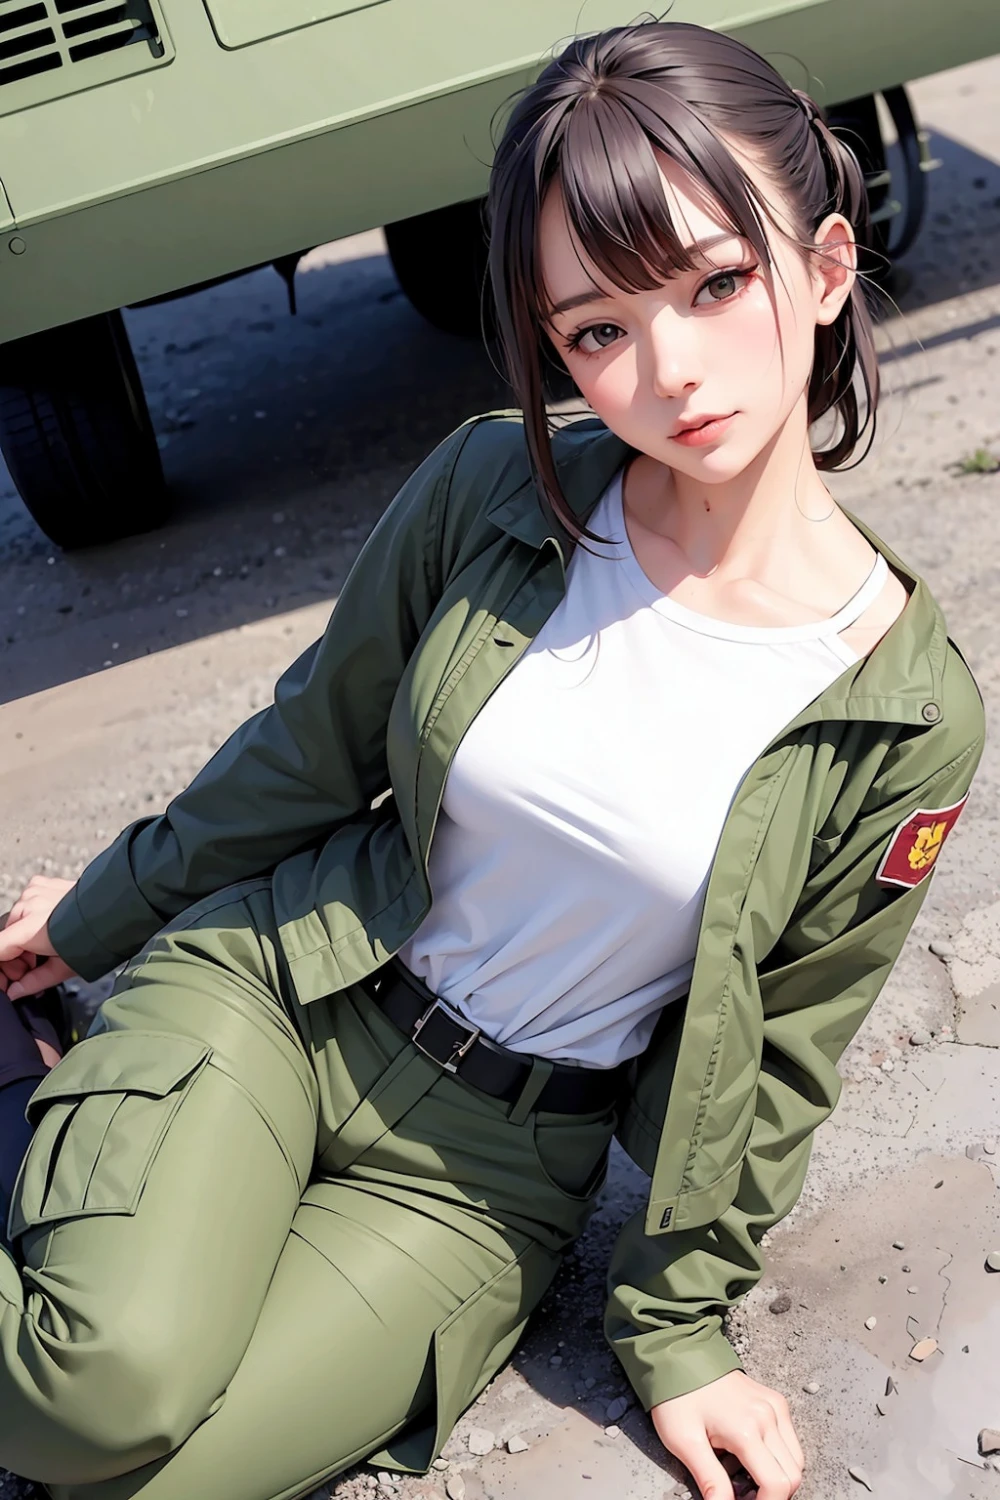 military-uniform-anime-style-all-ages-16